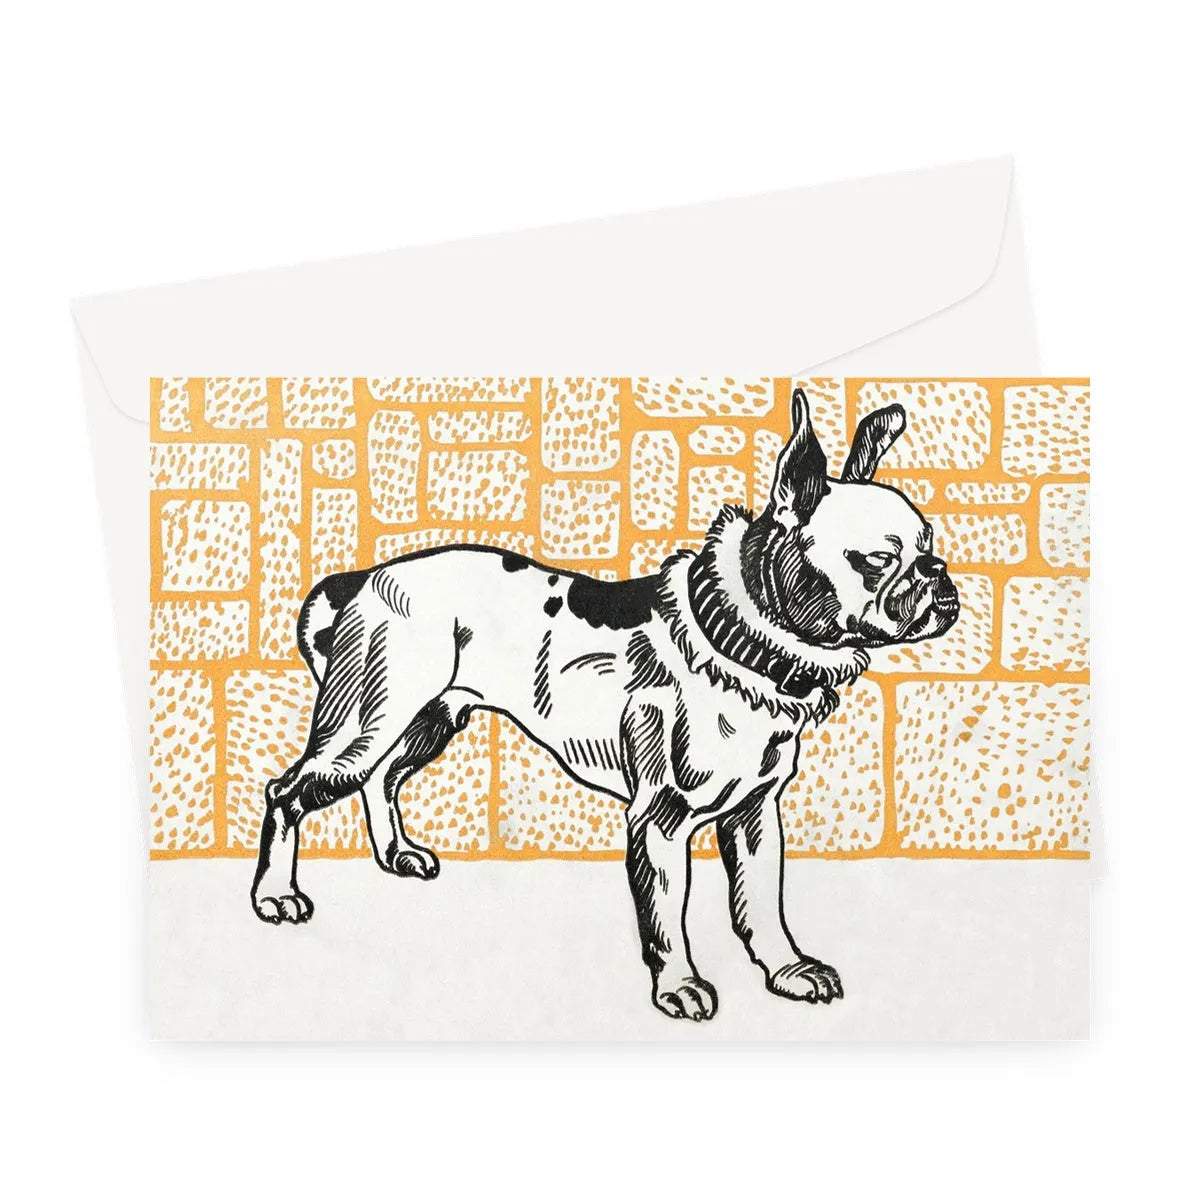 Pitbull Terrier By Moriz Jung Greeting Card - A5 Landscape / 1 Card - Greeting & Note Cards - Aesthetic Art